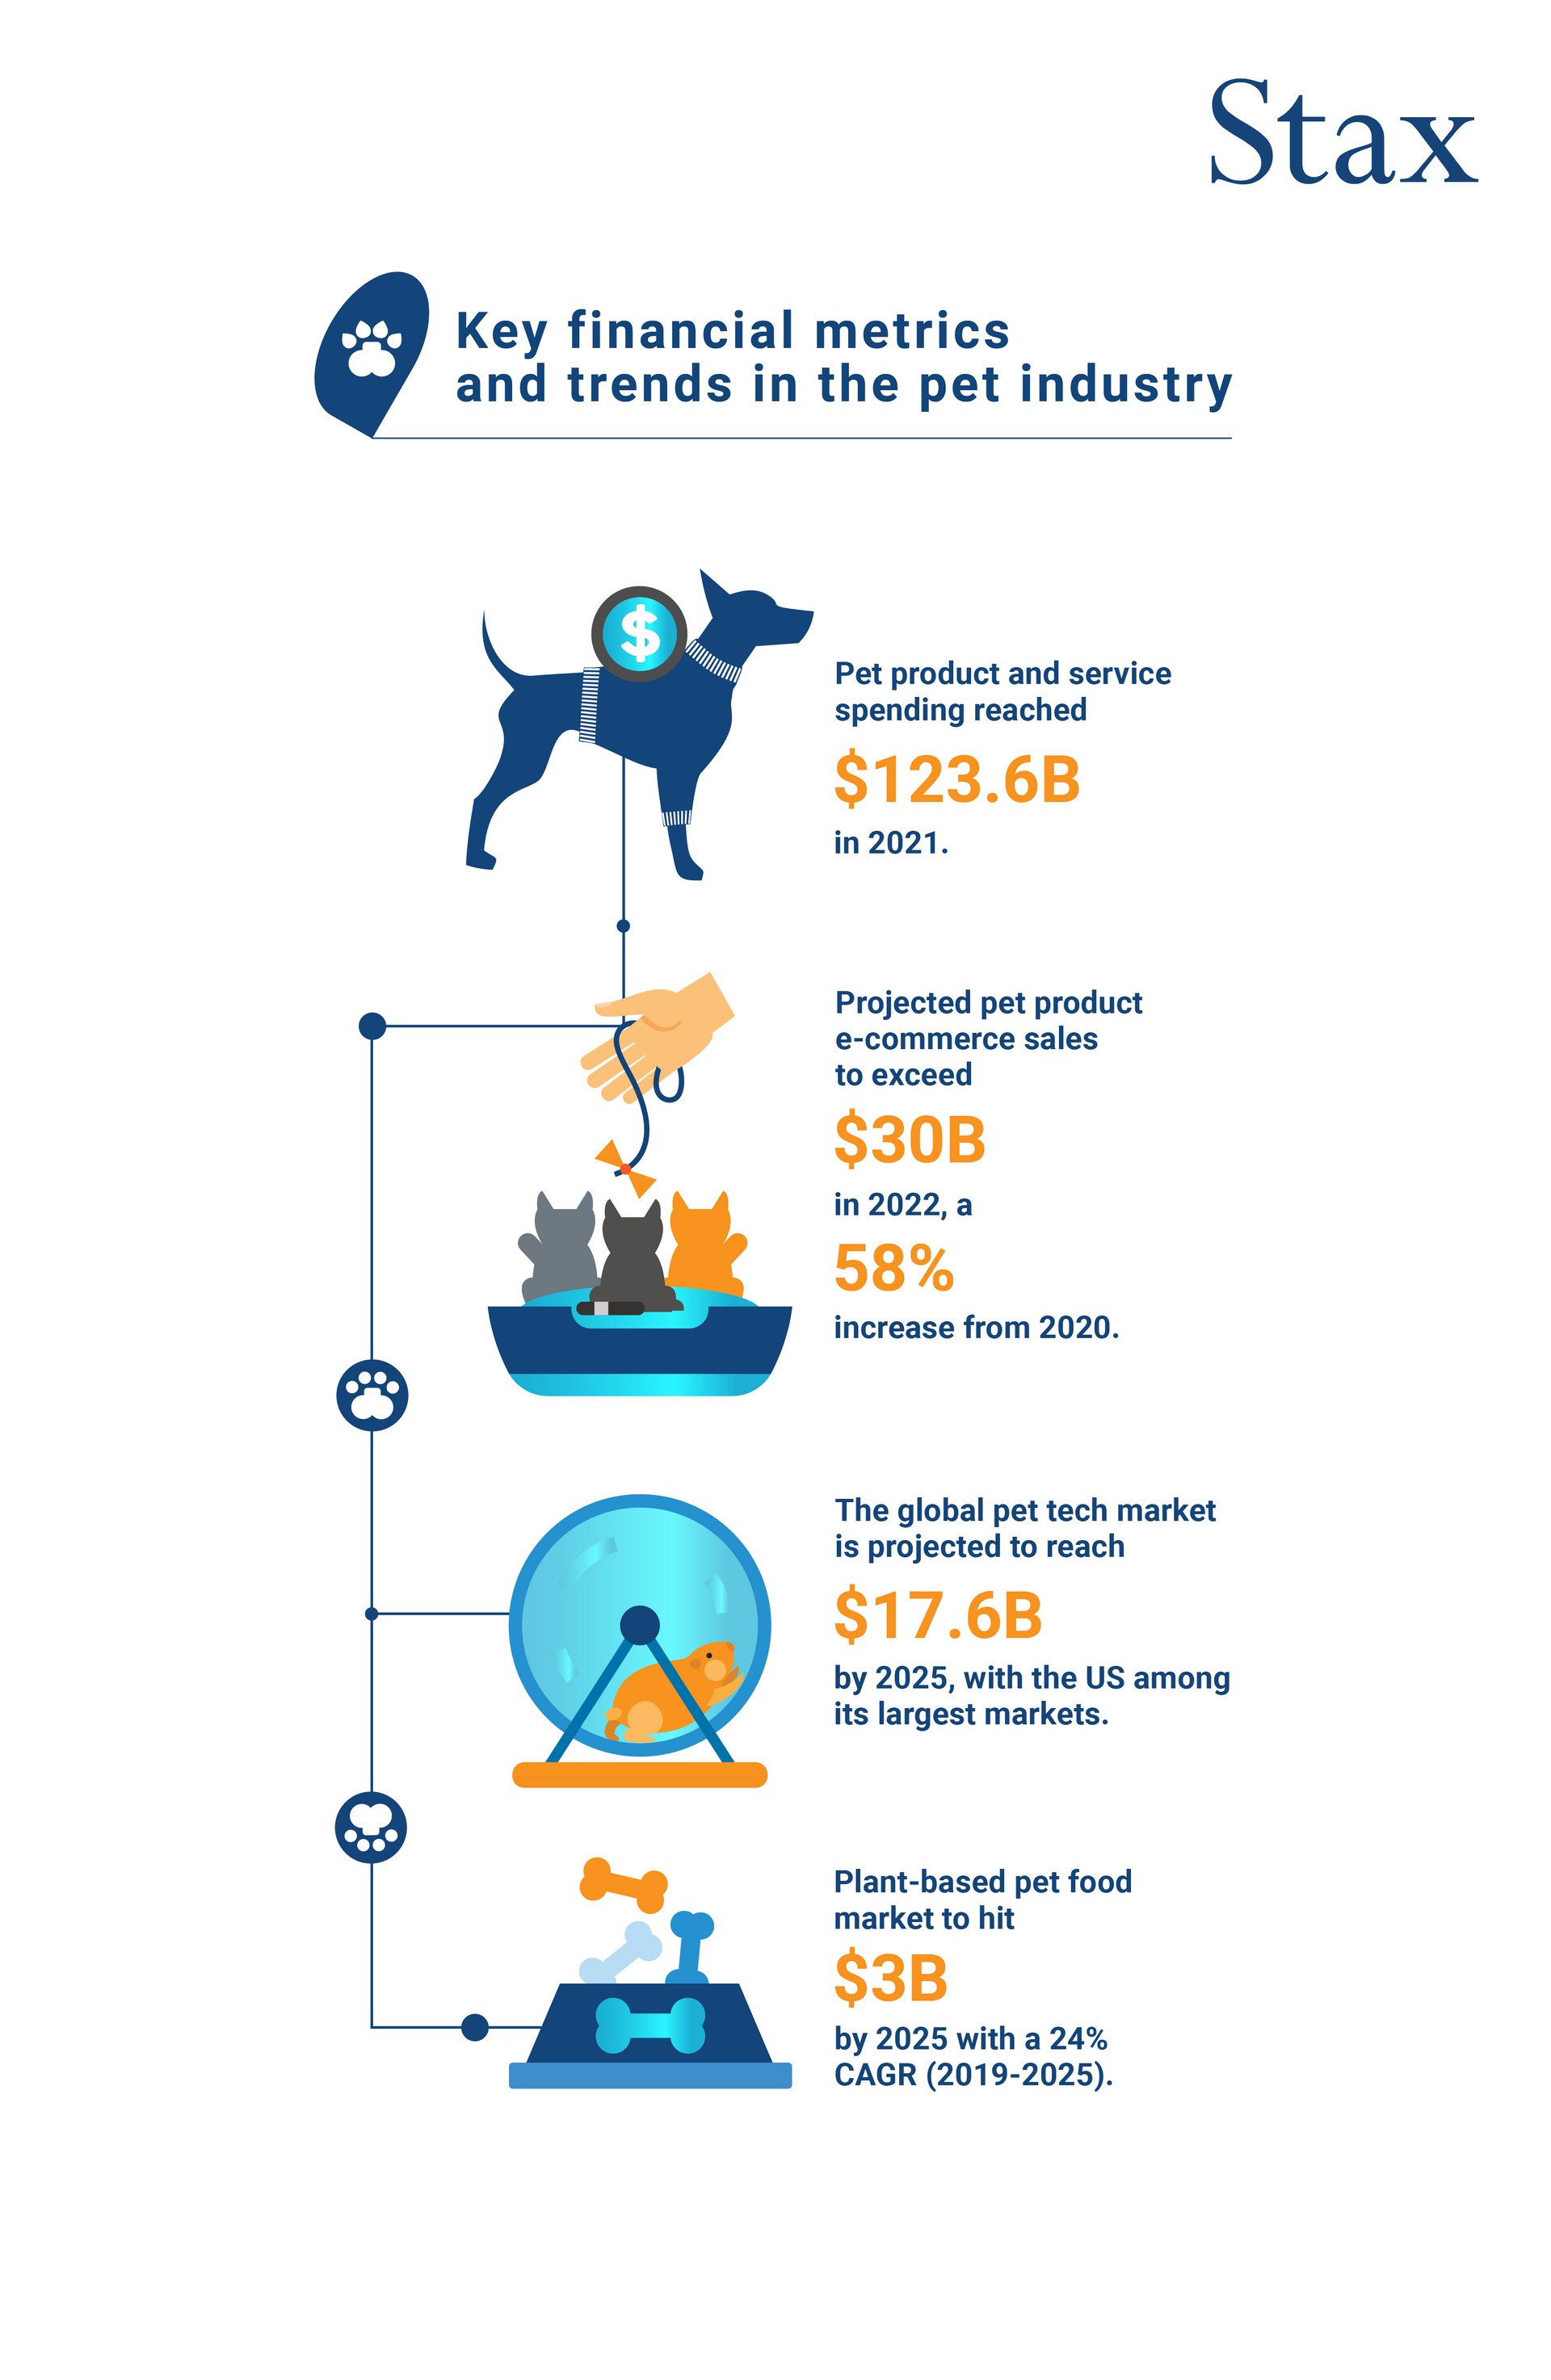 Key financial metrics and trends in the pet industry. Infographic highlights consumer spend on pet products and services, projected pet product and e-commerce sales and how spending has grown from 2020. Infographic also highlights how much the pet market is projected to reach by 2025, as well as the growing niche within the pet industry (plant-based pet food).